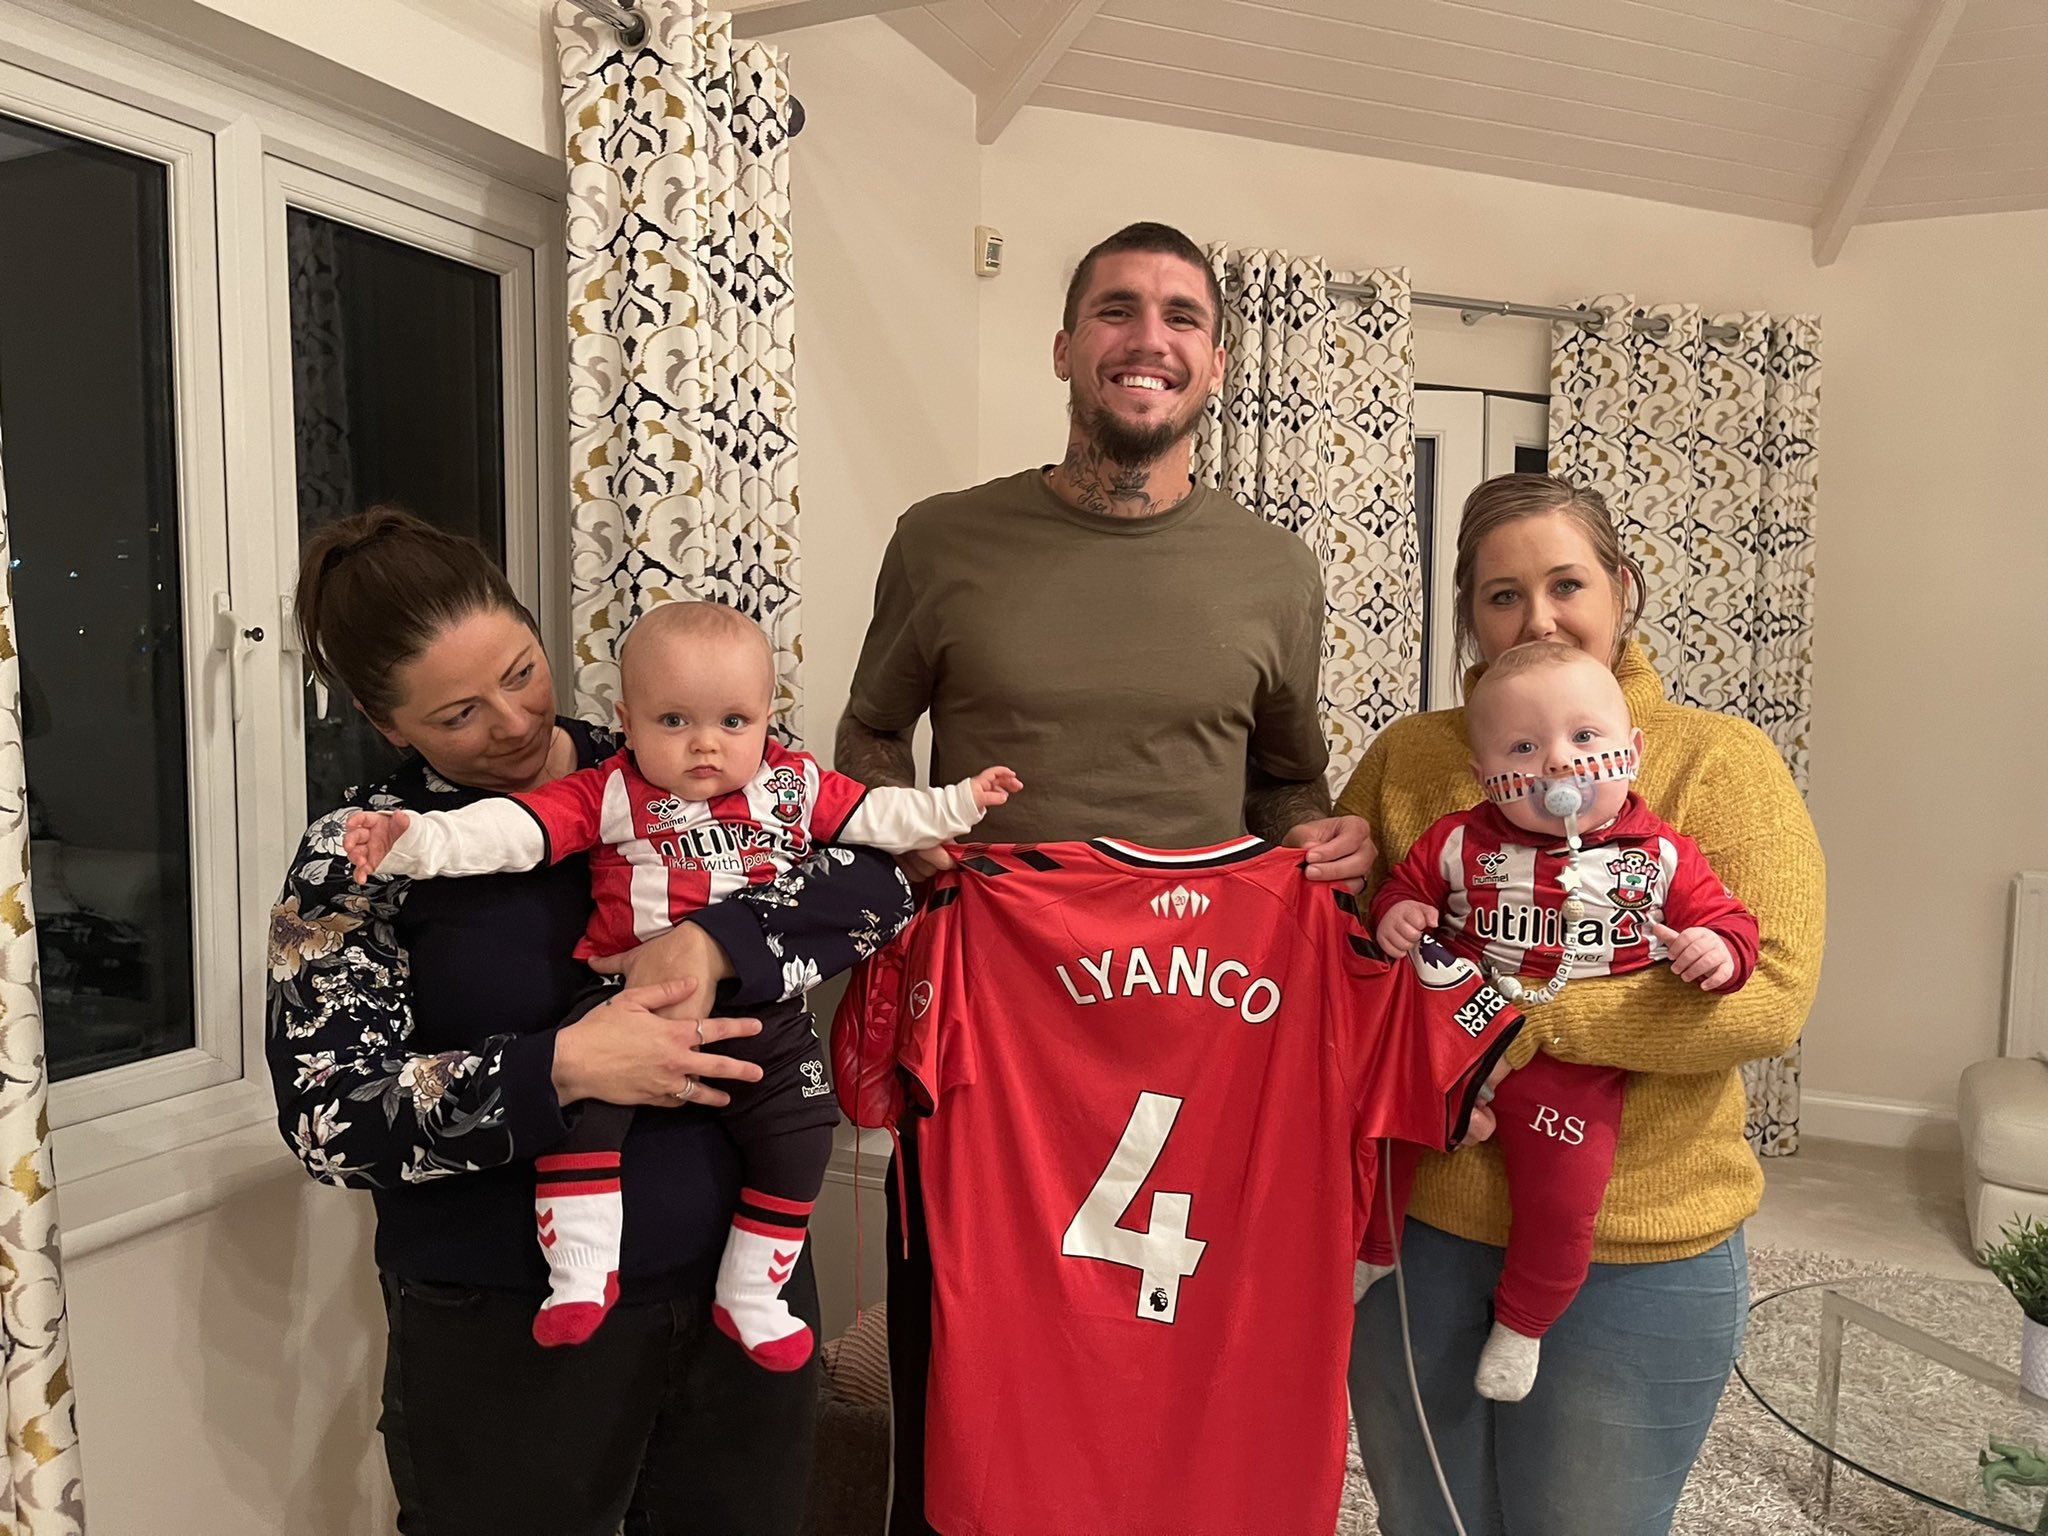 Southampton's Lyanco gives back and supports fundraising